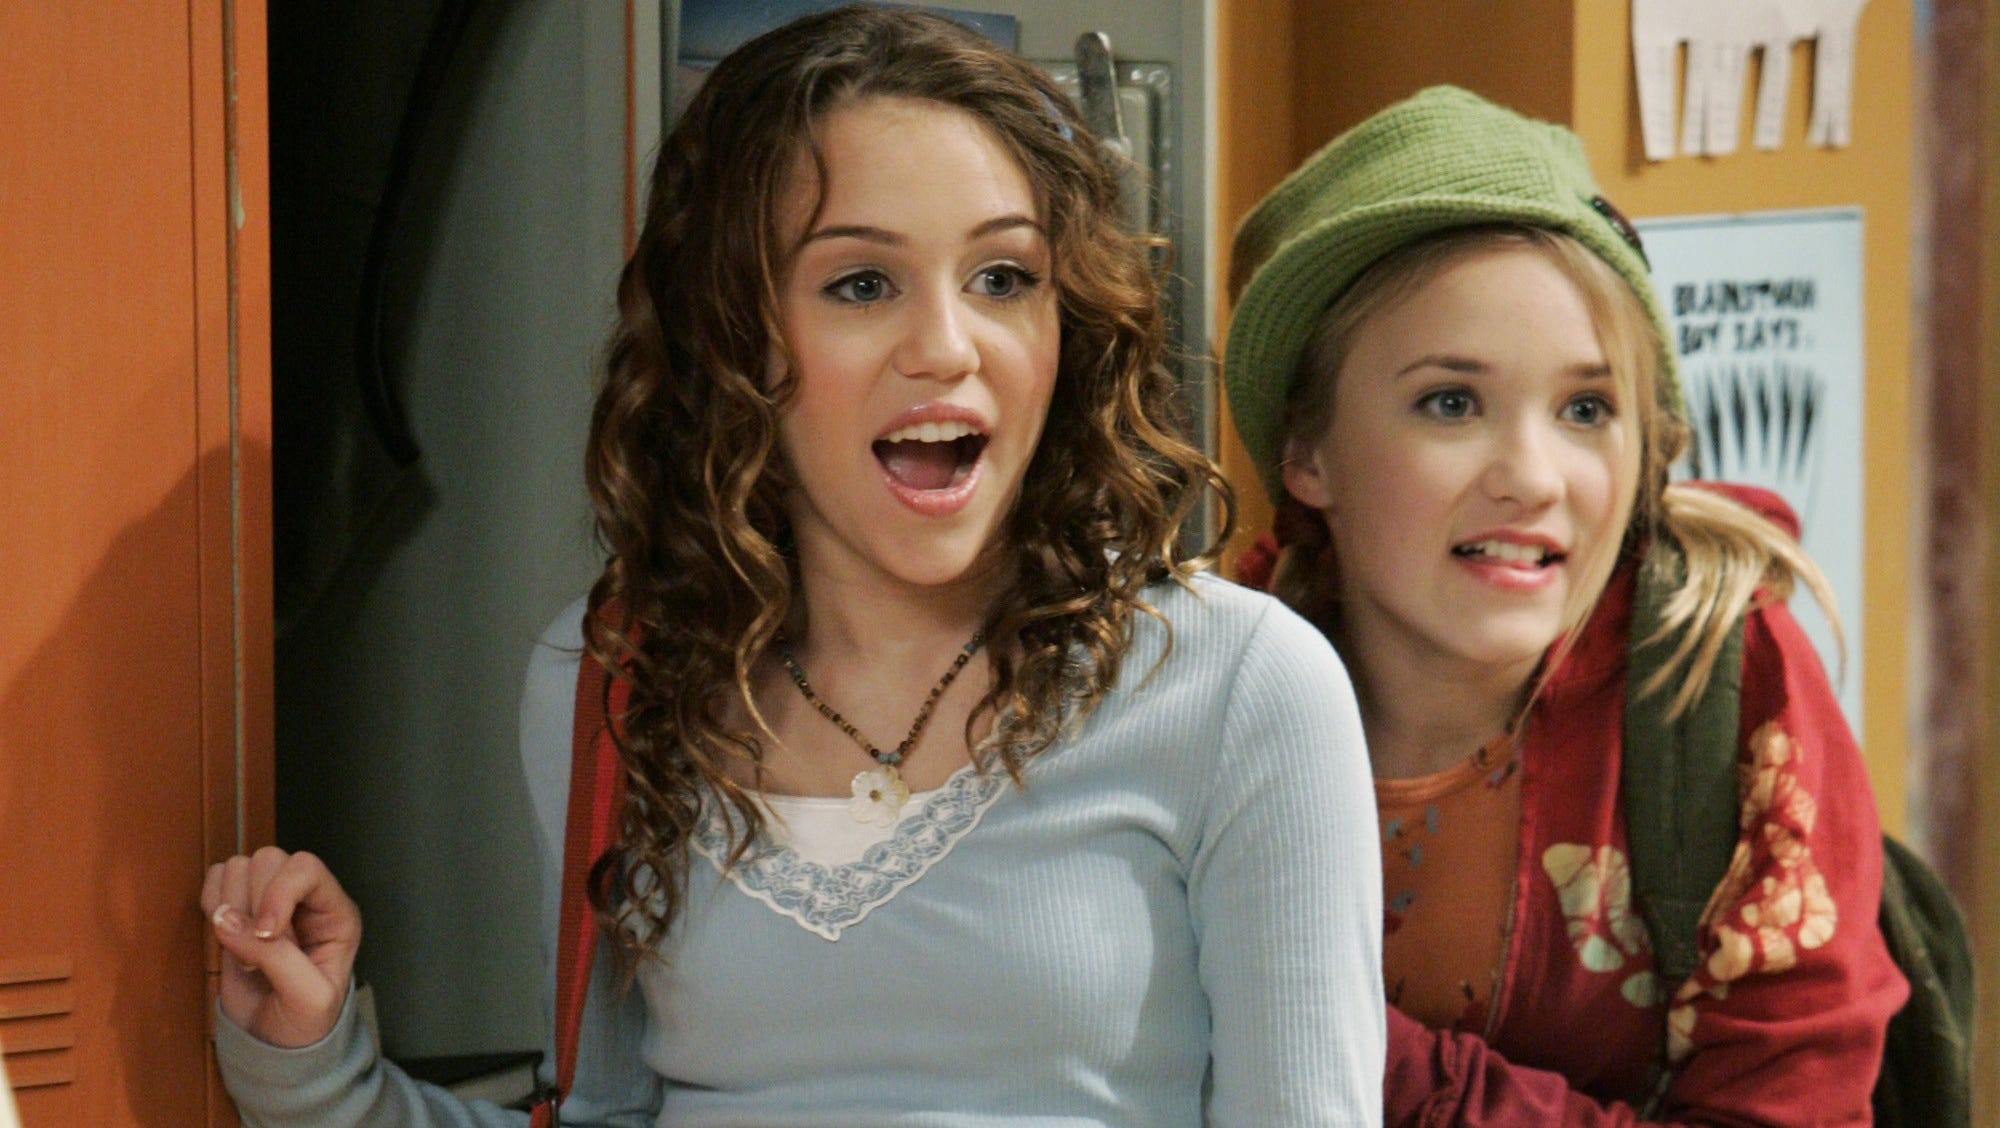 Miley Cyrus and 'Hannah Montana' cast reflect on show's 10th anniversary